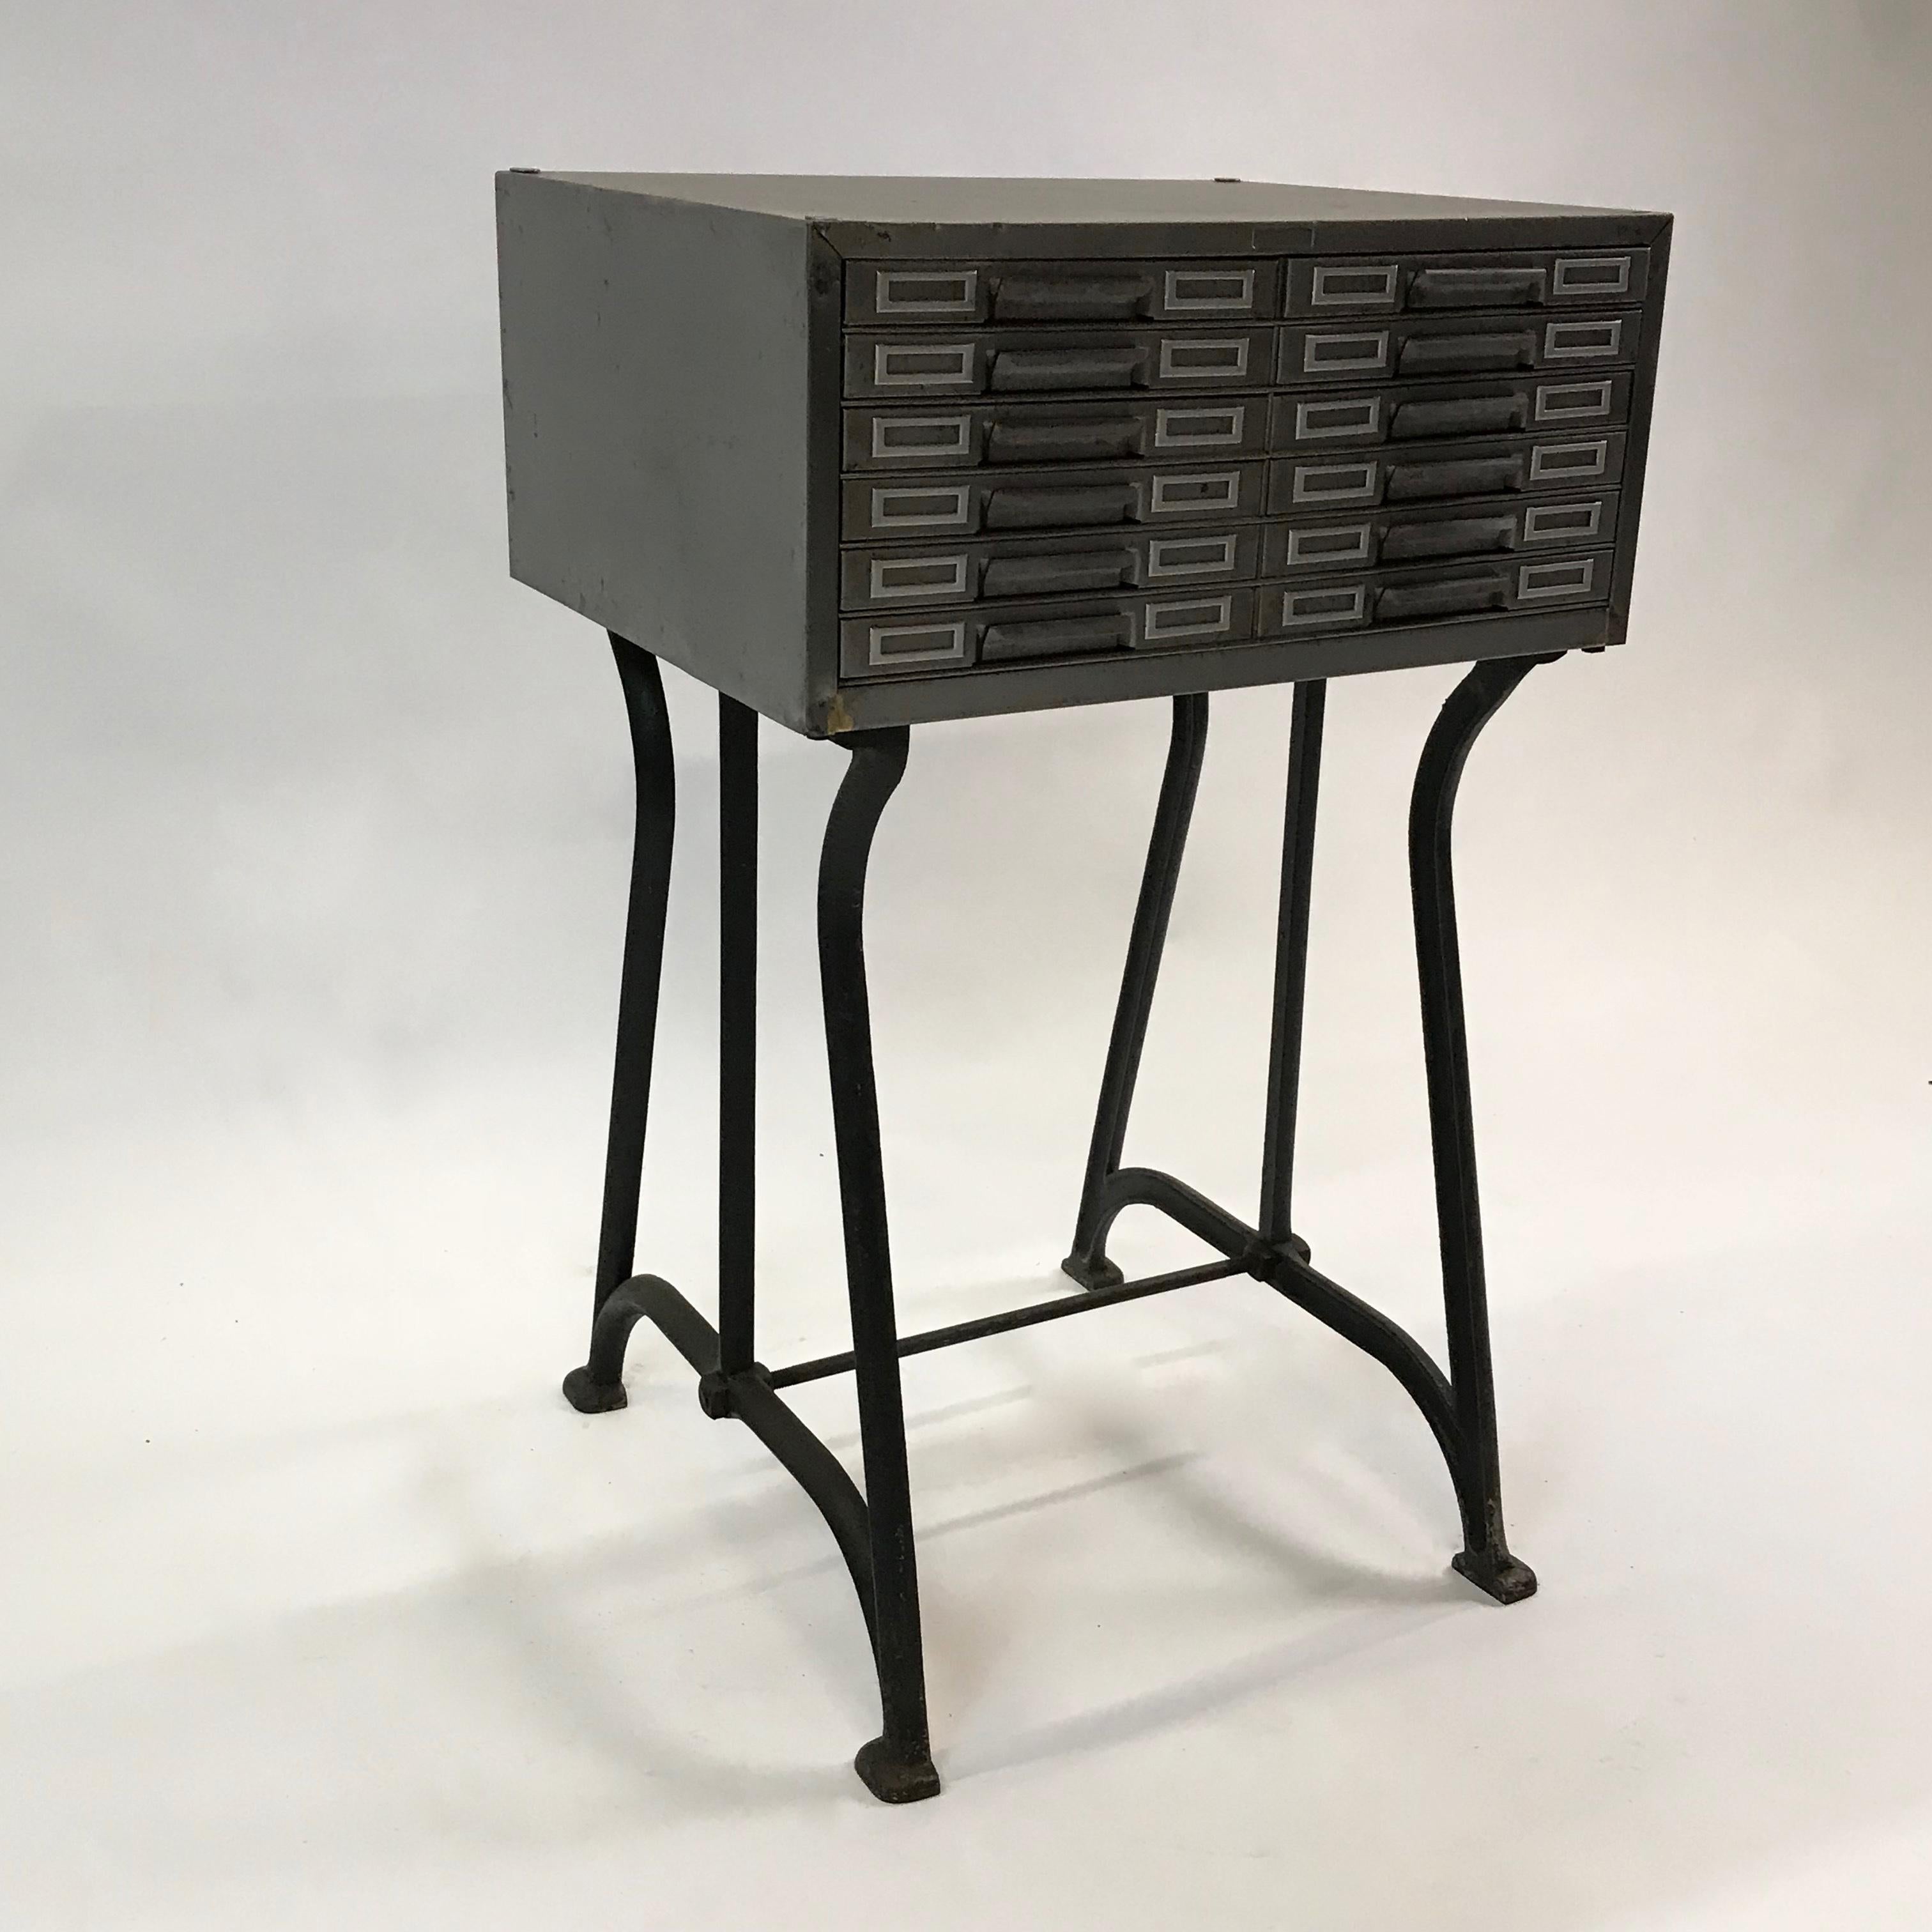 Industrial, brushed steel, catalog cabinet on a cast iron base holds multiple index cards, photos or postcards for flat, easy access storage. The cabinet itself measures: 20 W x 18 D x 9 inches height. The chair shown has sold.